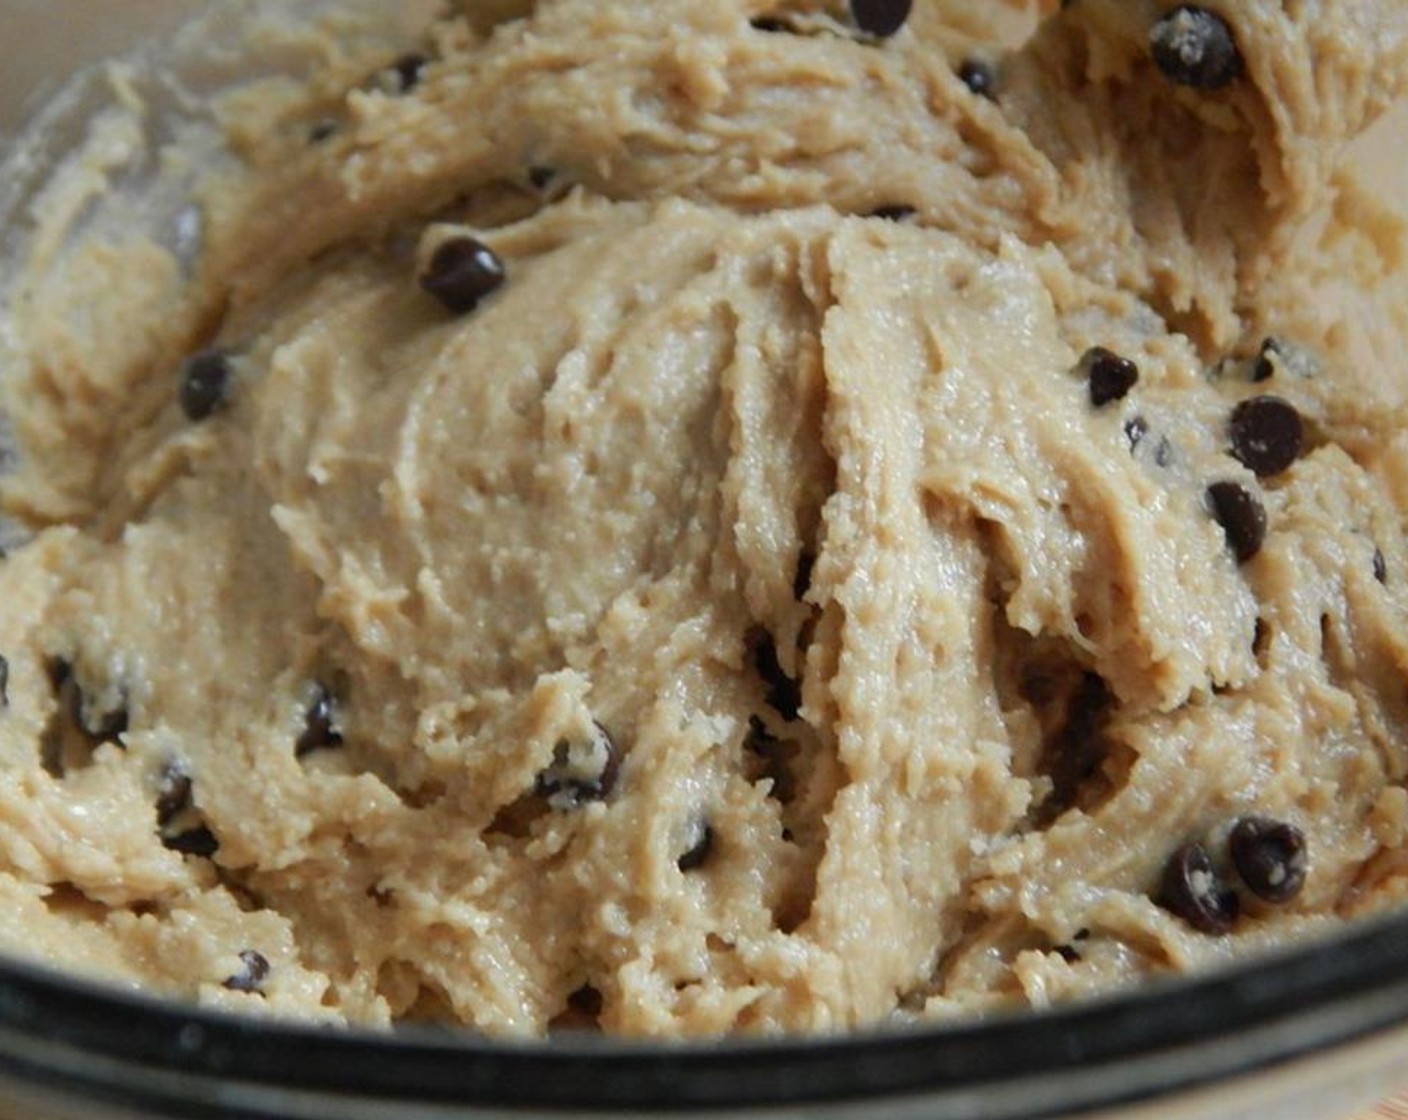 step 2 Cream Light Margarine (2 Tbsp), Brown Sugar (1/2 cup), Vegetable Oil (1 tsp). Add Egg (1), Vanilla Extract (1 tsp) and mix. Stir in All-Purpose Flour (3/4 cup), Baking Soda (1/2 tsp) and Mini Chocolate Chips (1 1/2 Tbsp).